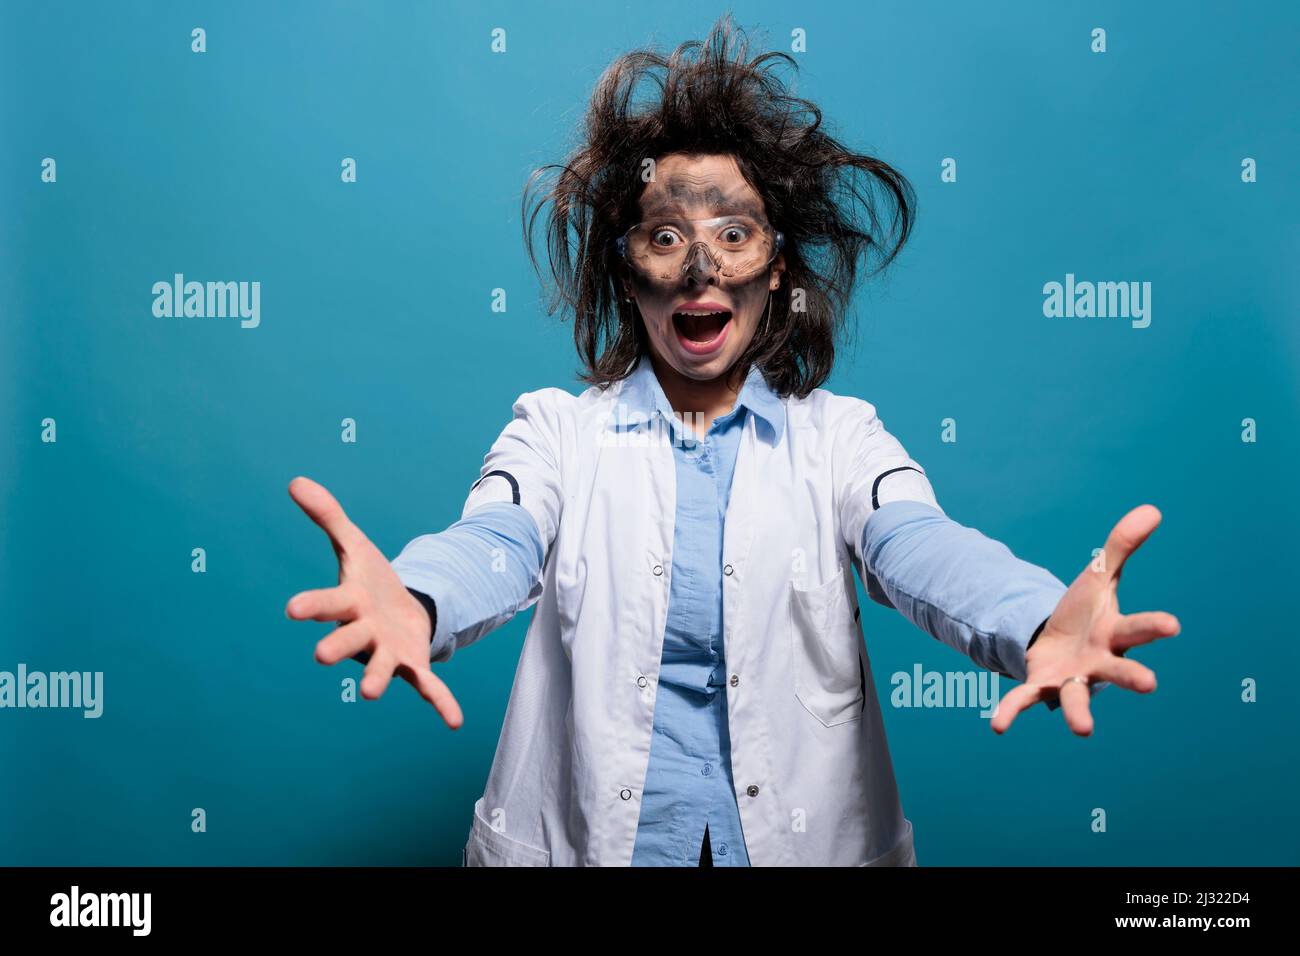 Wacky looking insane chemistry scientist yelling in panic with messy hairstyle and dirty face amazed by failed experiment explosion. Teriffied strange looking weirdo chemist on blue background. Stock Photo